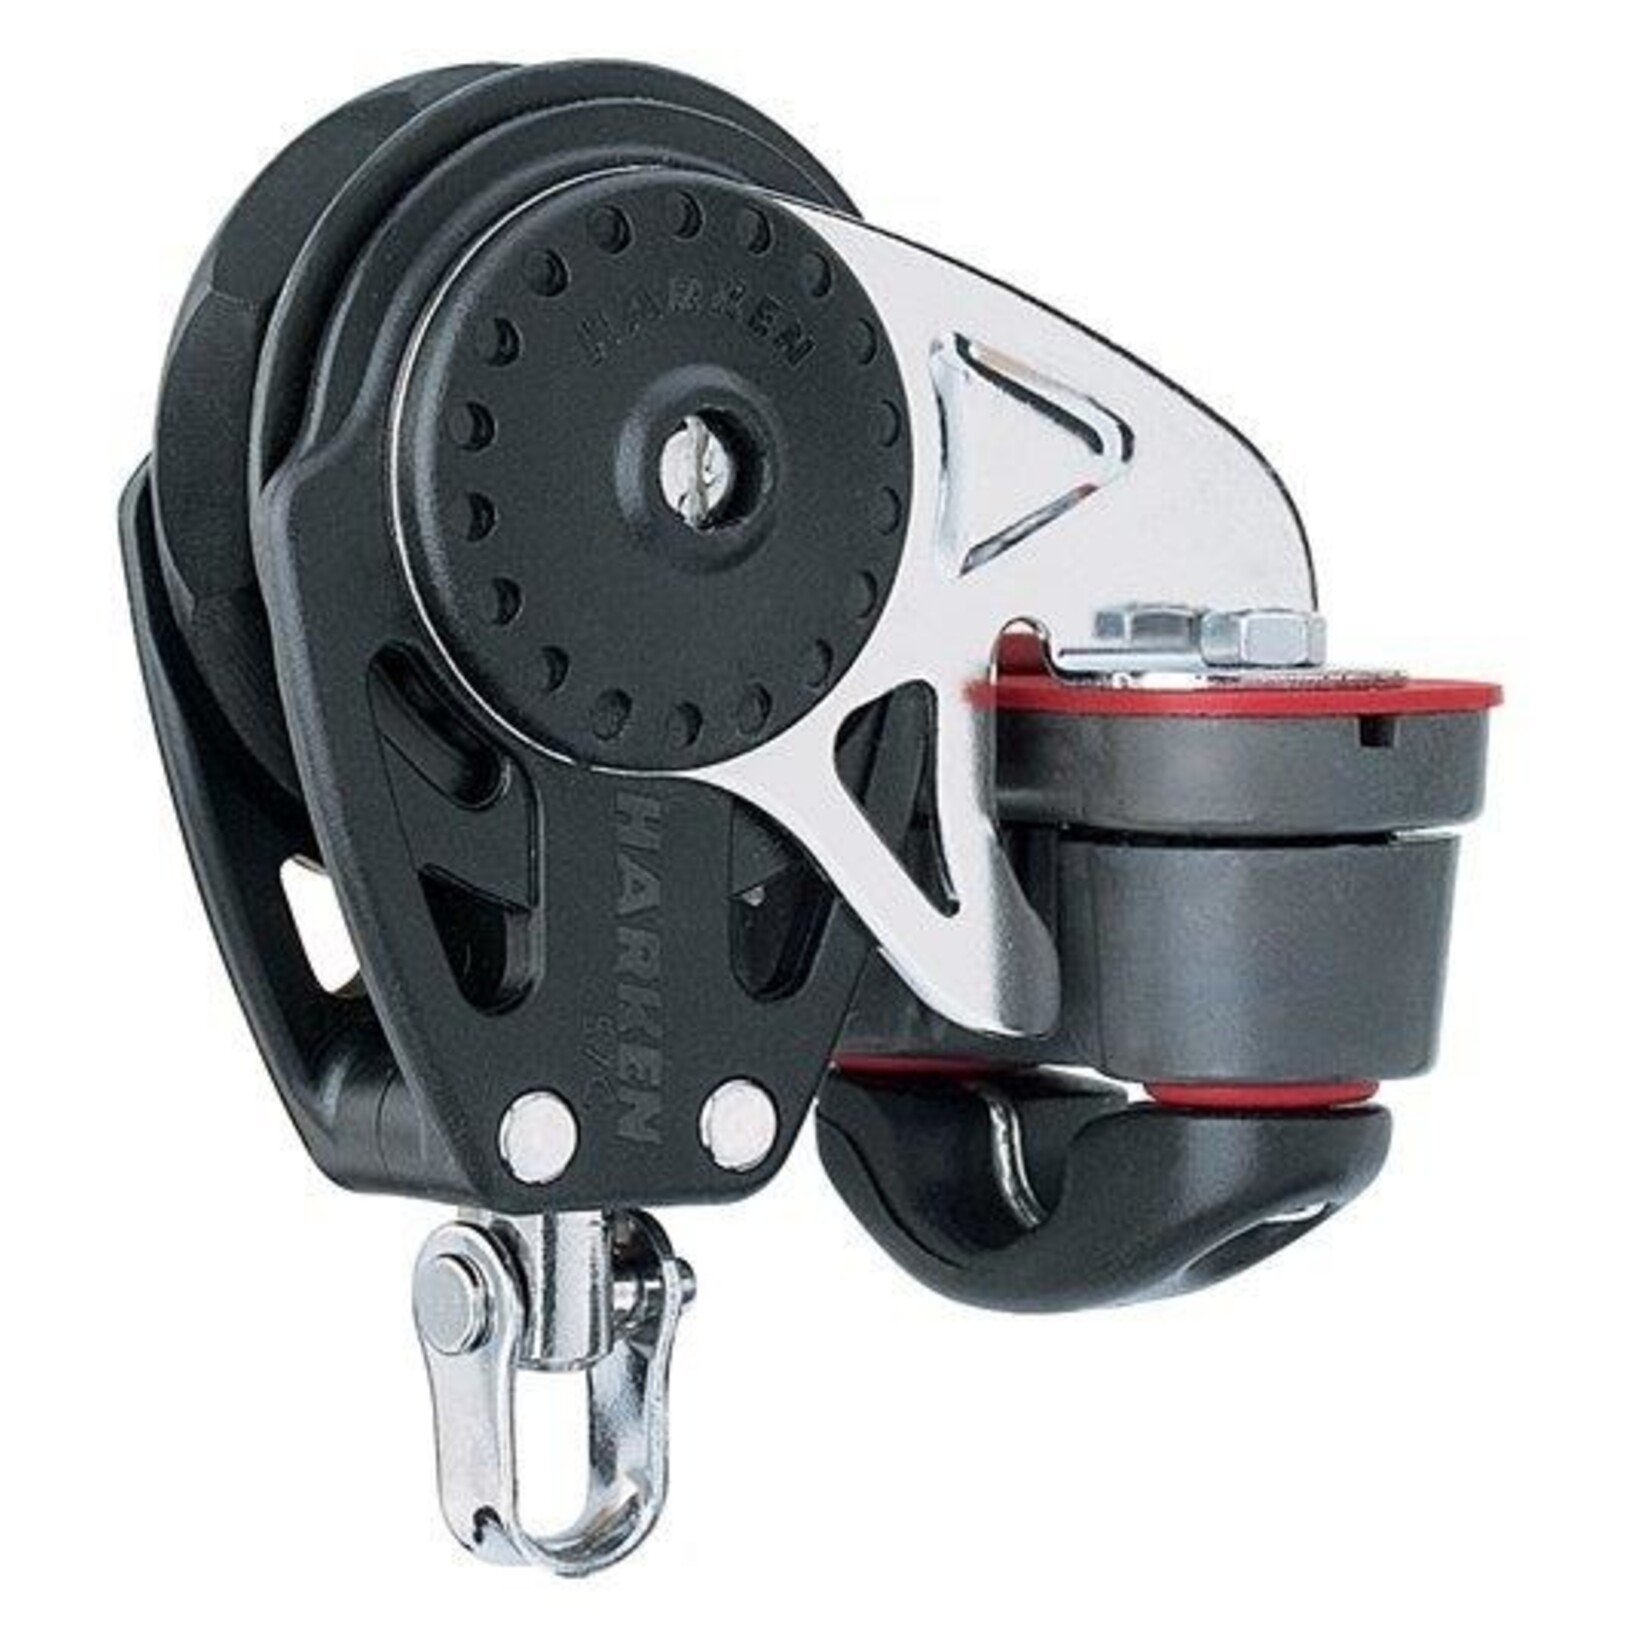 Harken 75mm Carbo Ratchamatic w/Cam Cleat